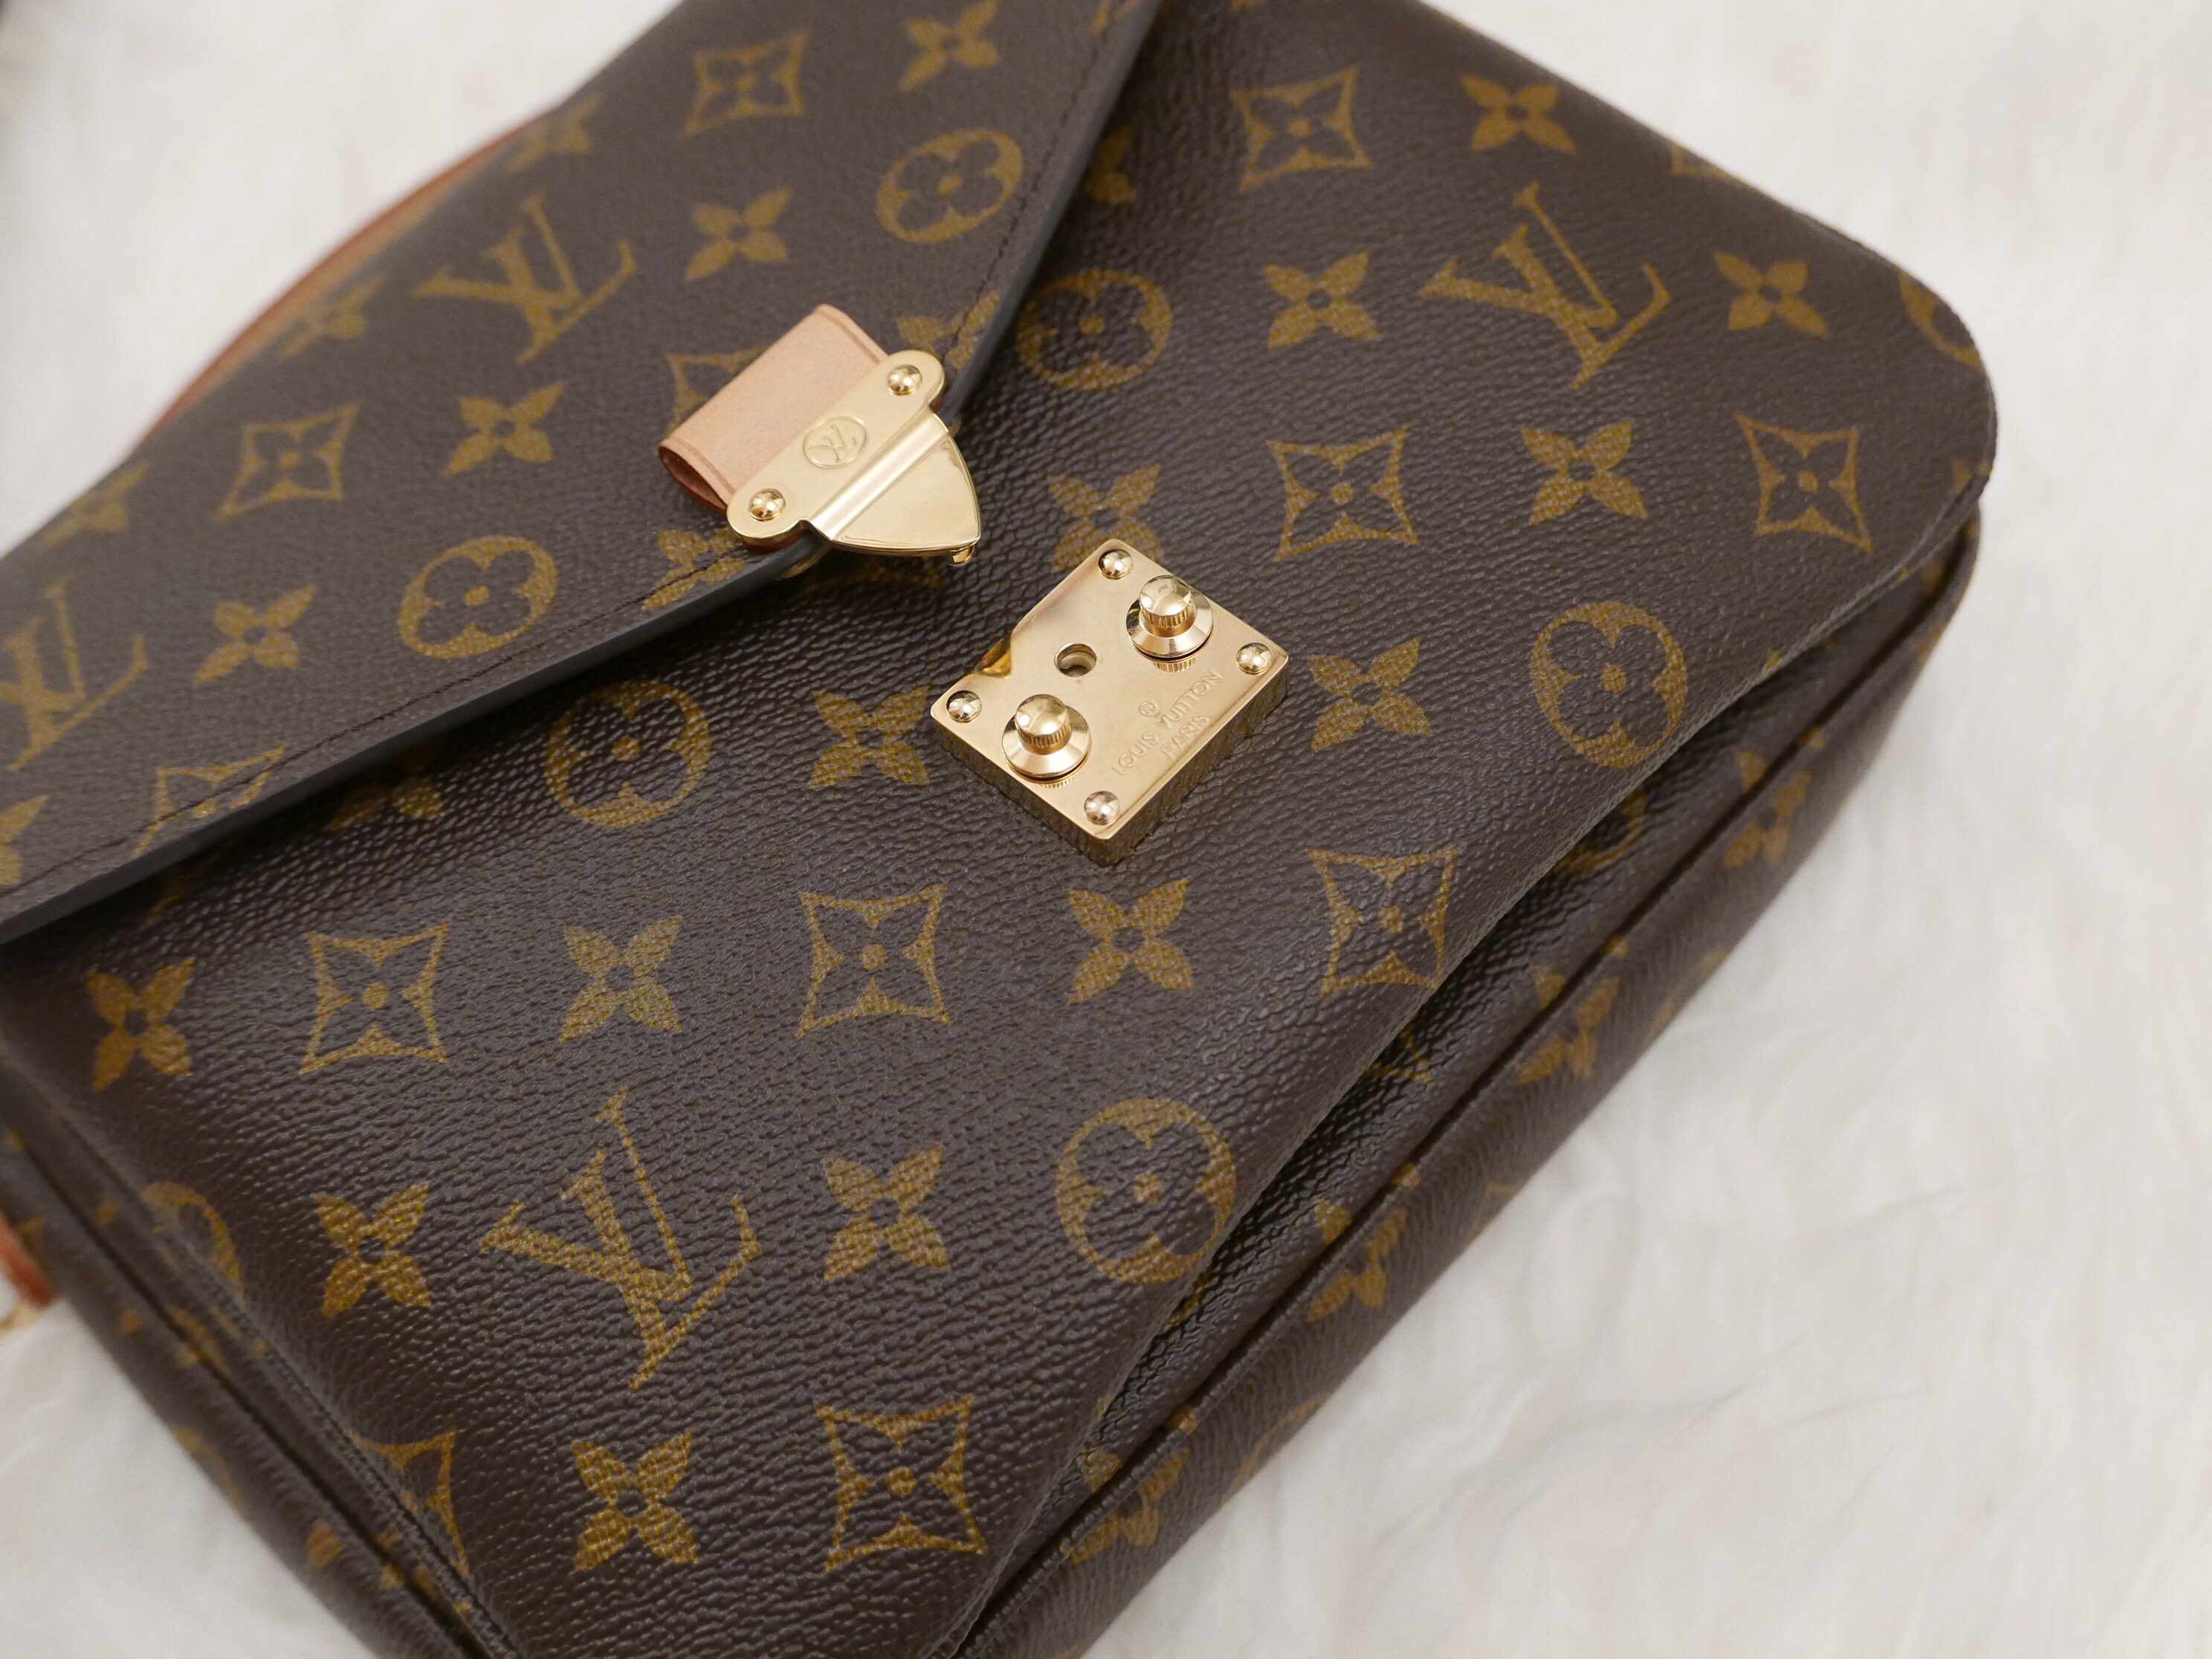 First Impression of LV Pochette Metis after 1 months of Use - Pros